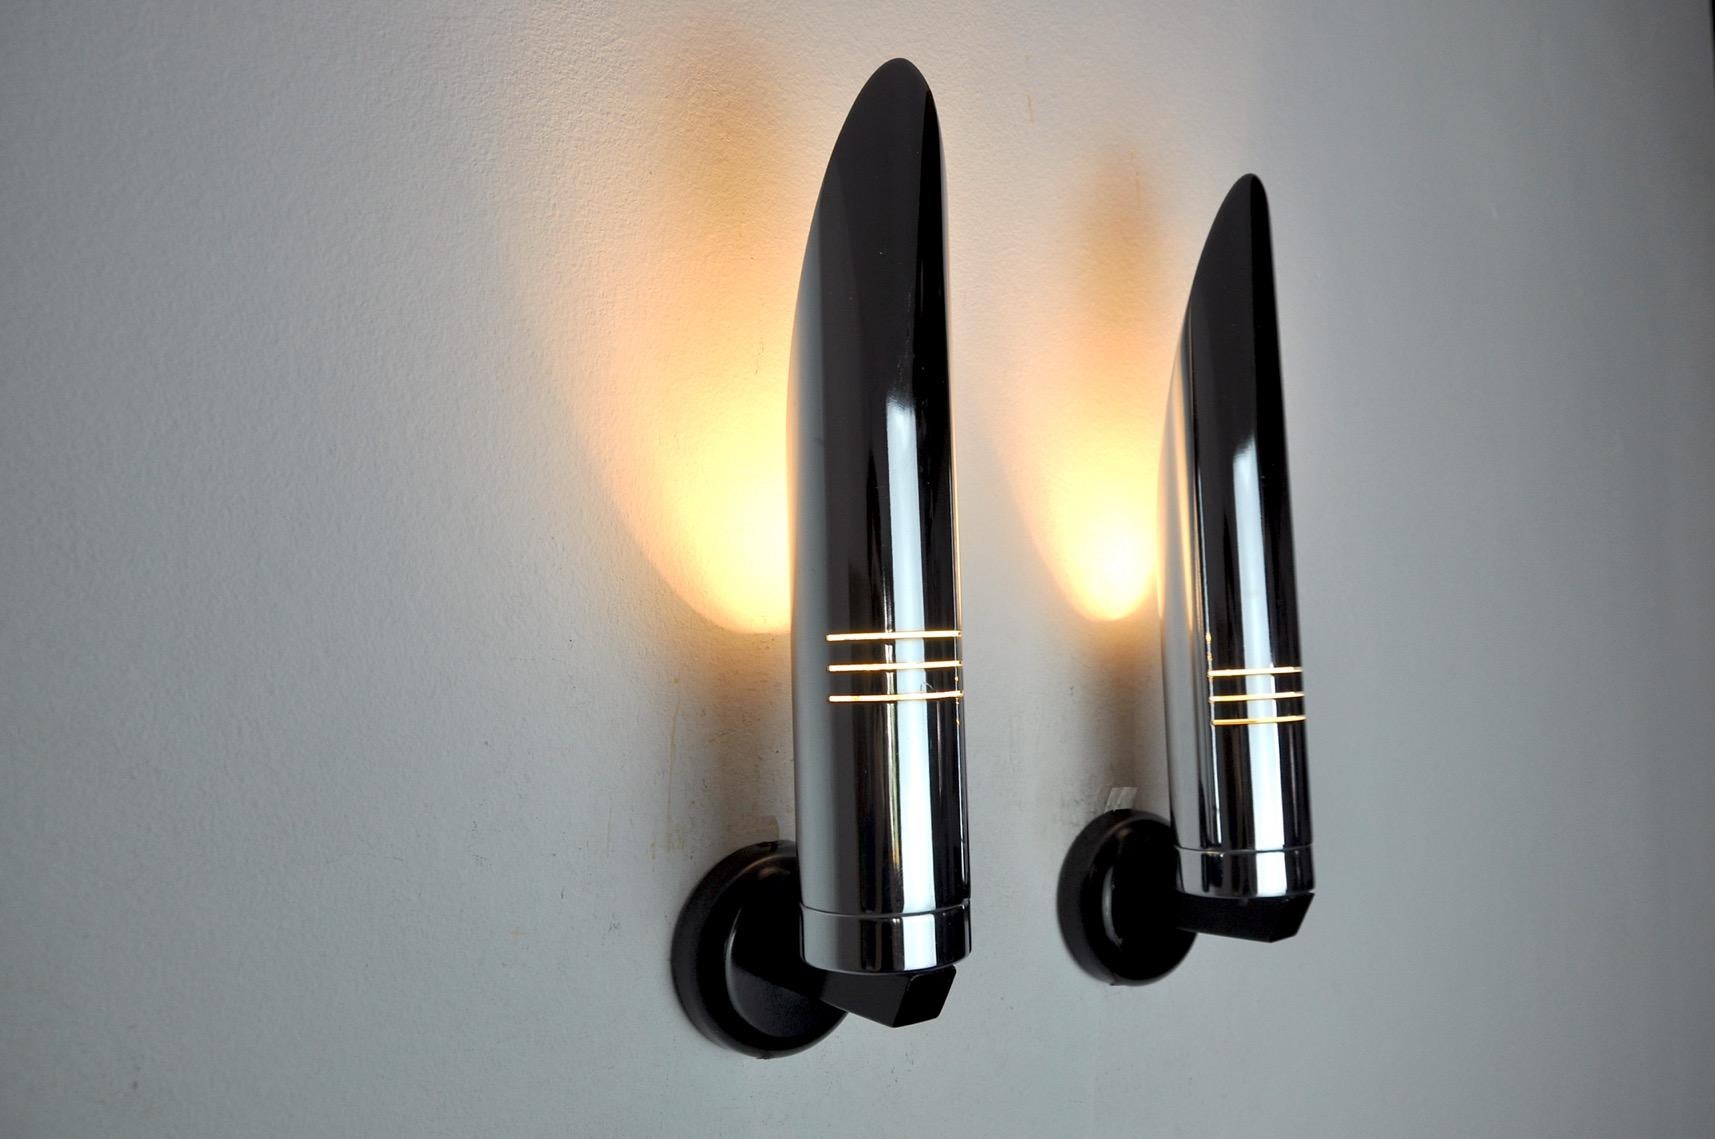 Metal Pair of RAAK Wall Lamps, Space-Age Chrome Design, Germany, 1970 For Sale